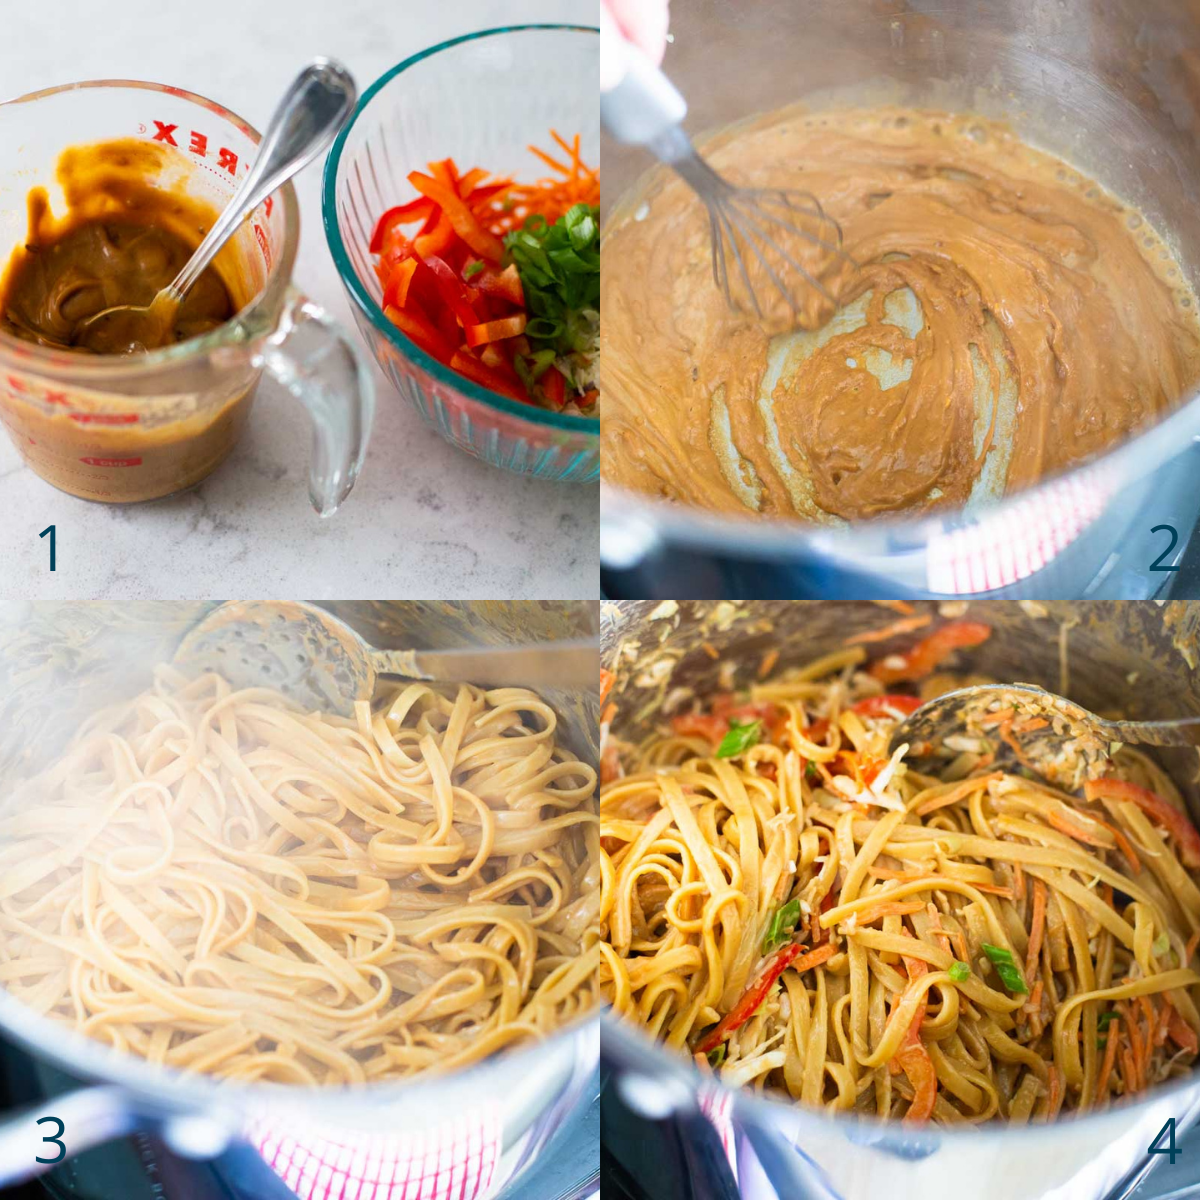 Step by step photos show how to toss the pasta in the peanut butter sauce.